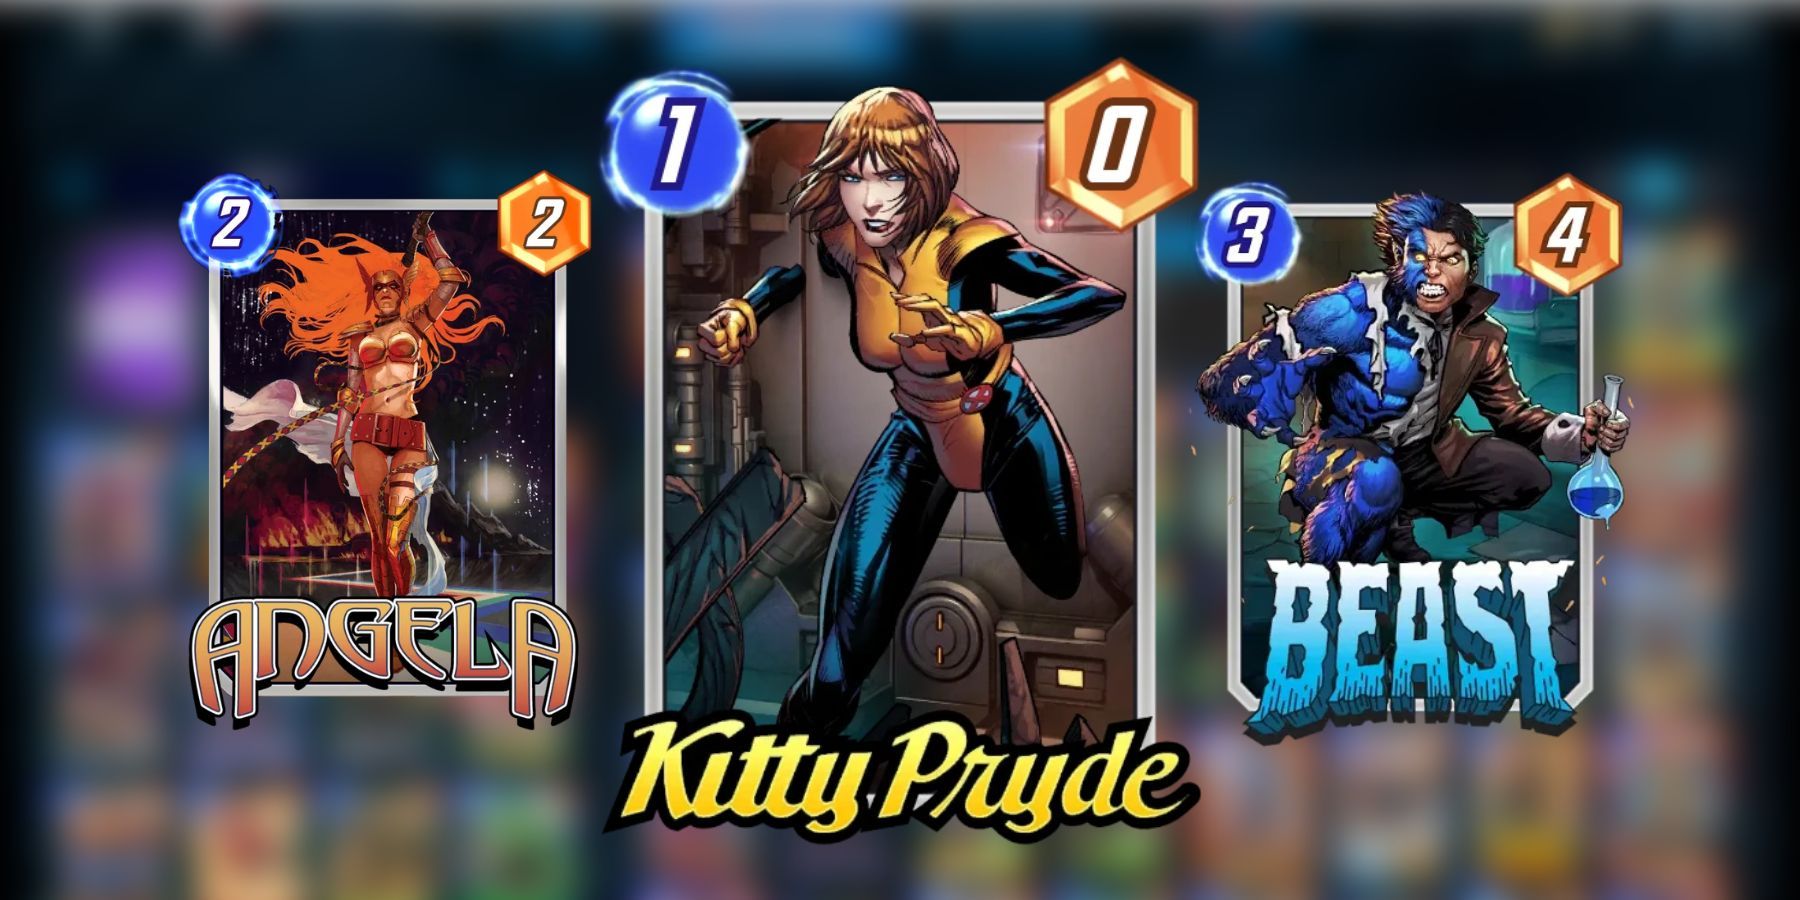 kitty pryde, angela, beast cards in marvel snap.